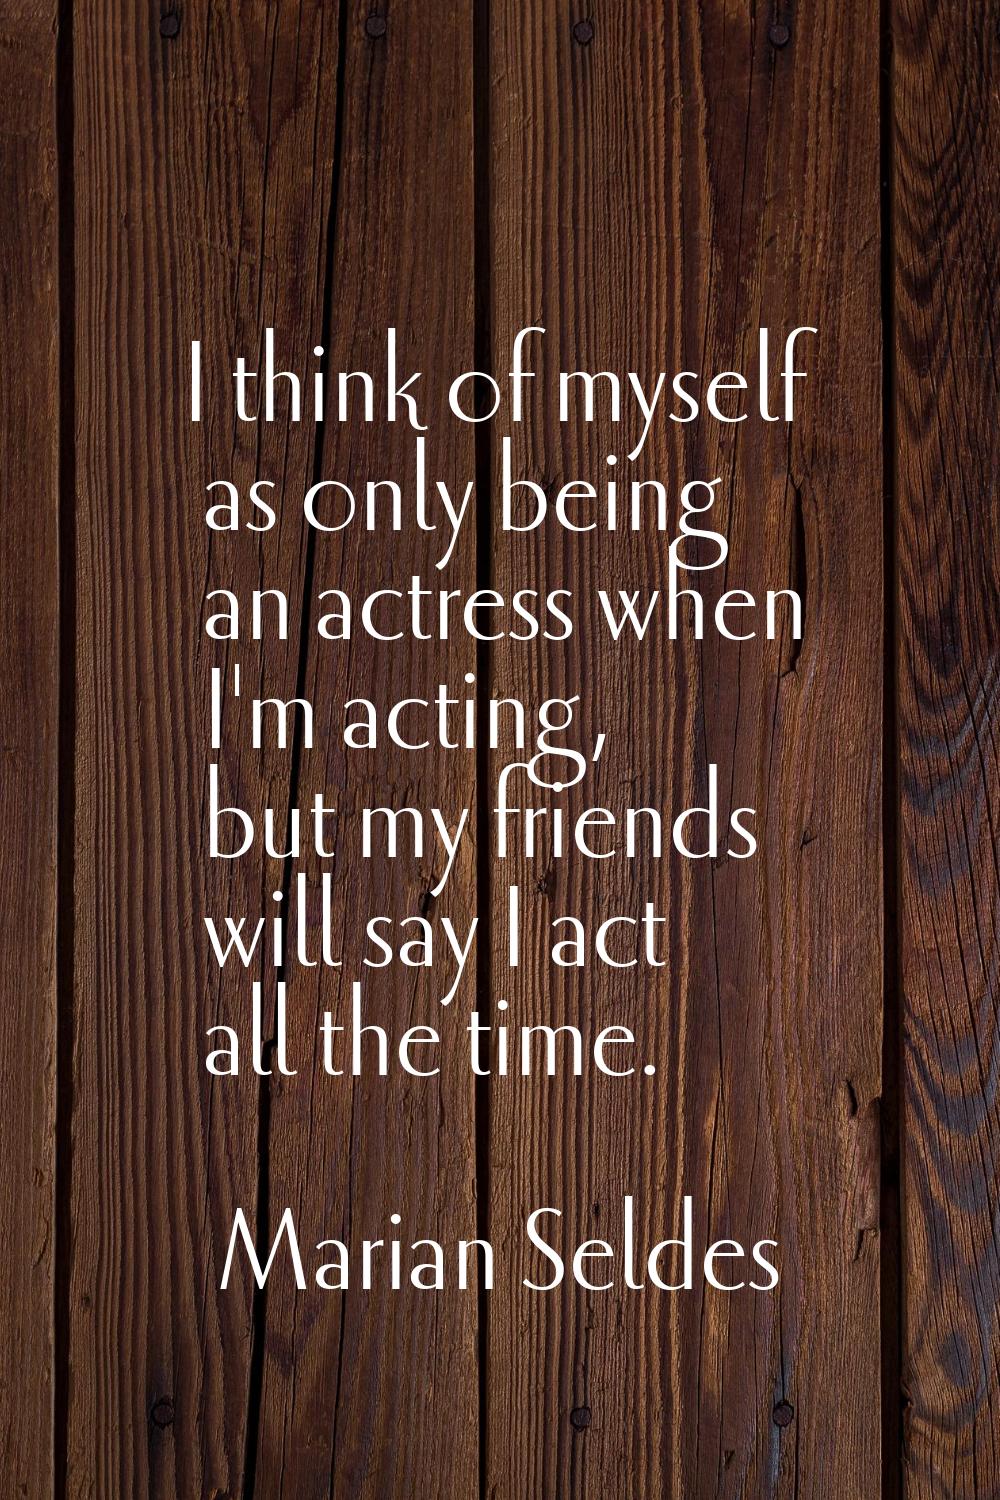 I think of myself as only being an actress when I'm acting, but my friends will say I act all the t